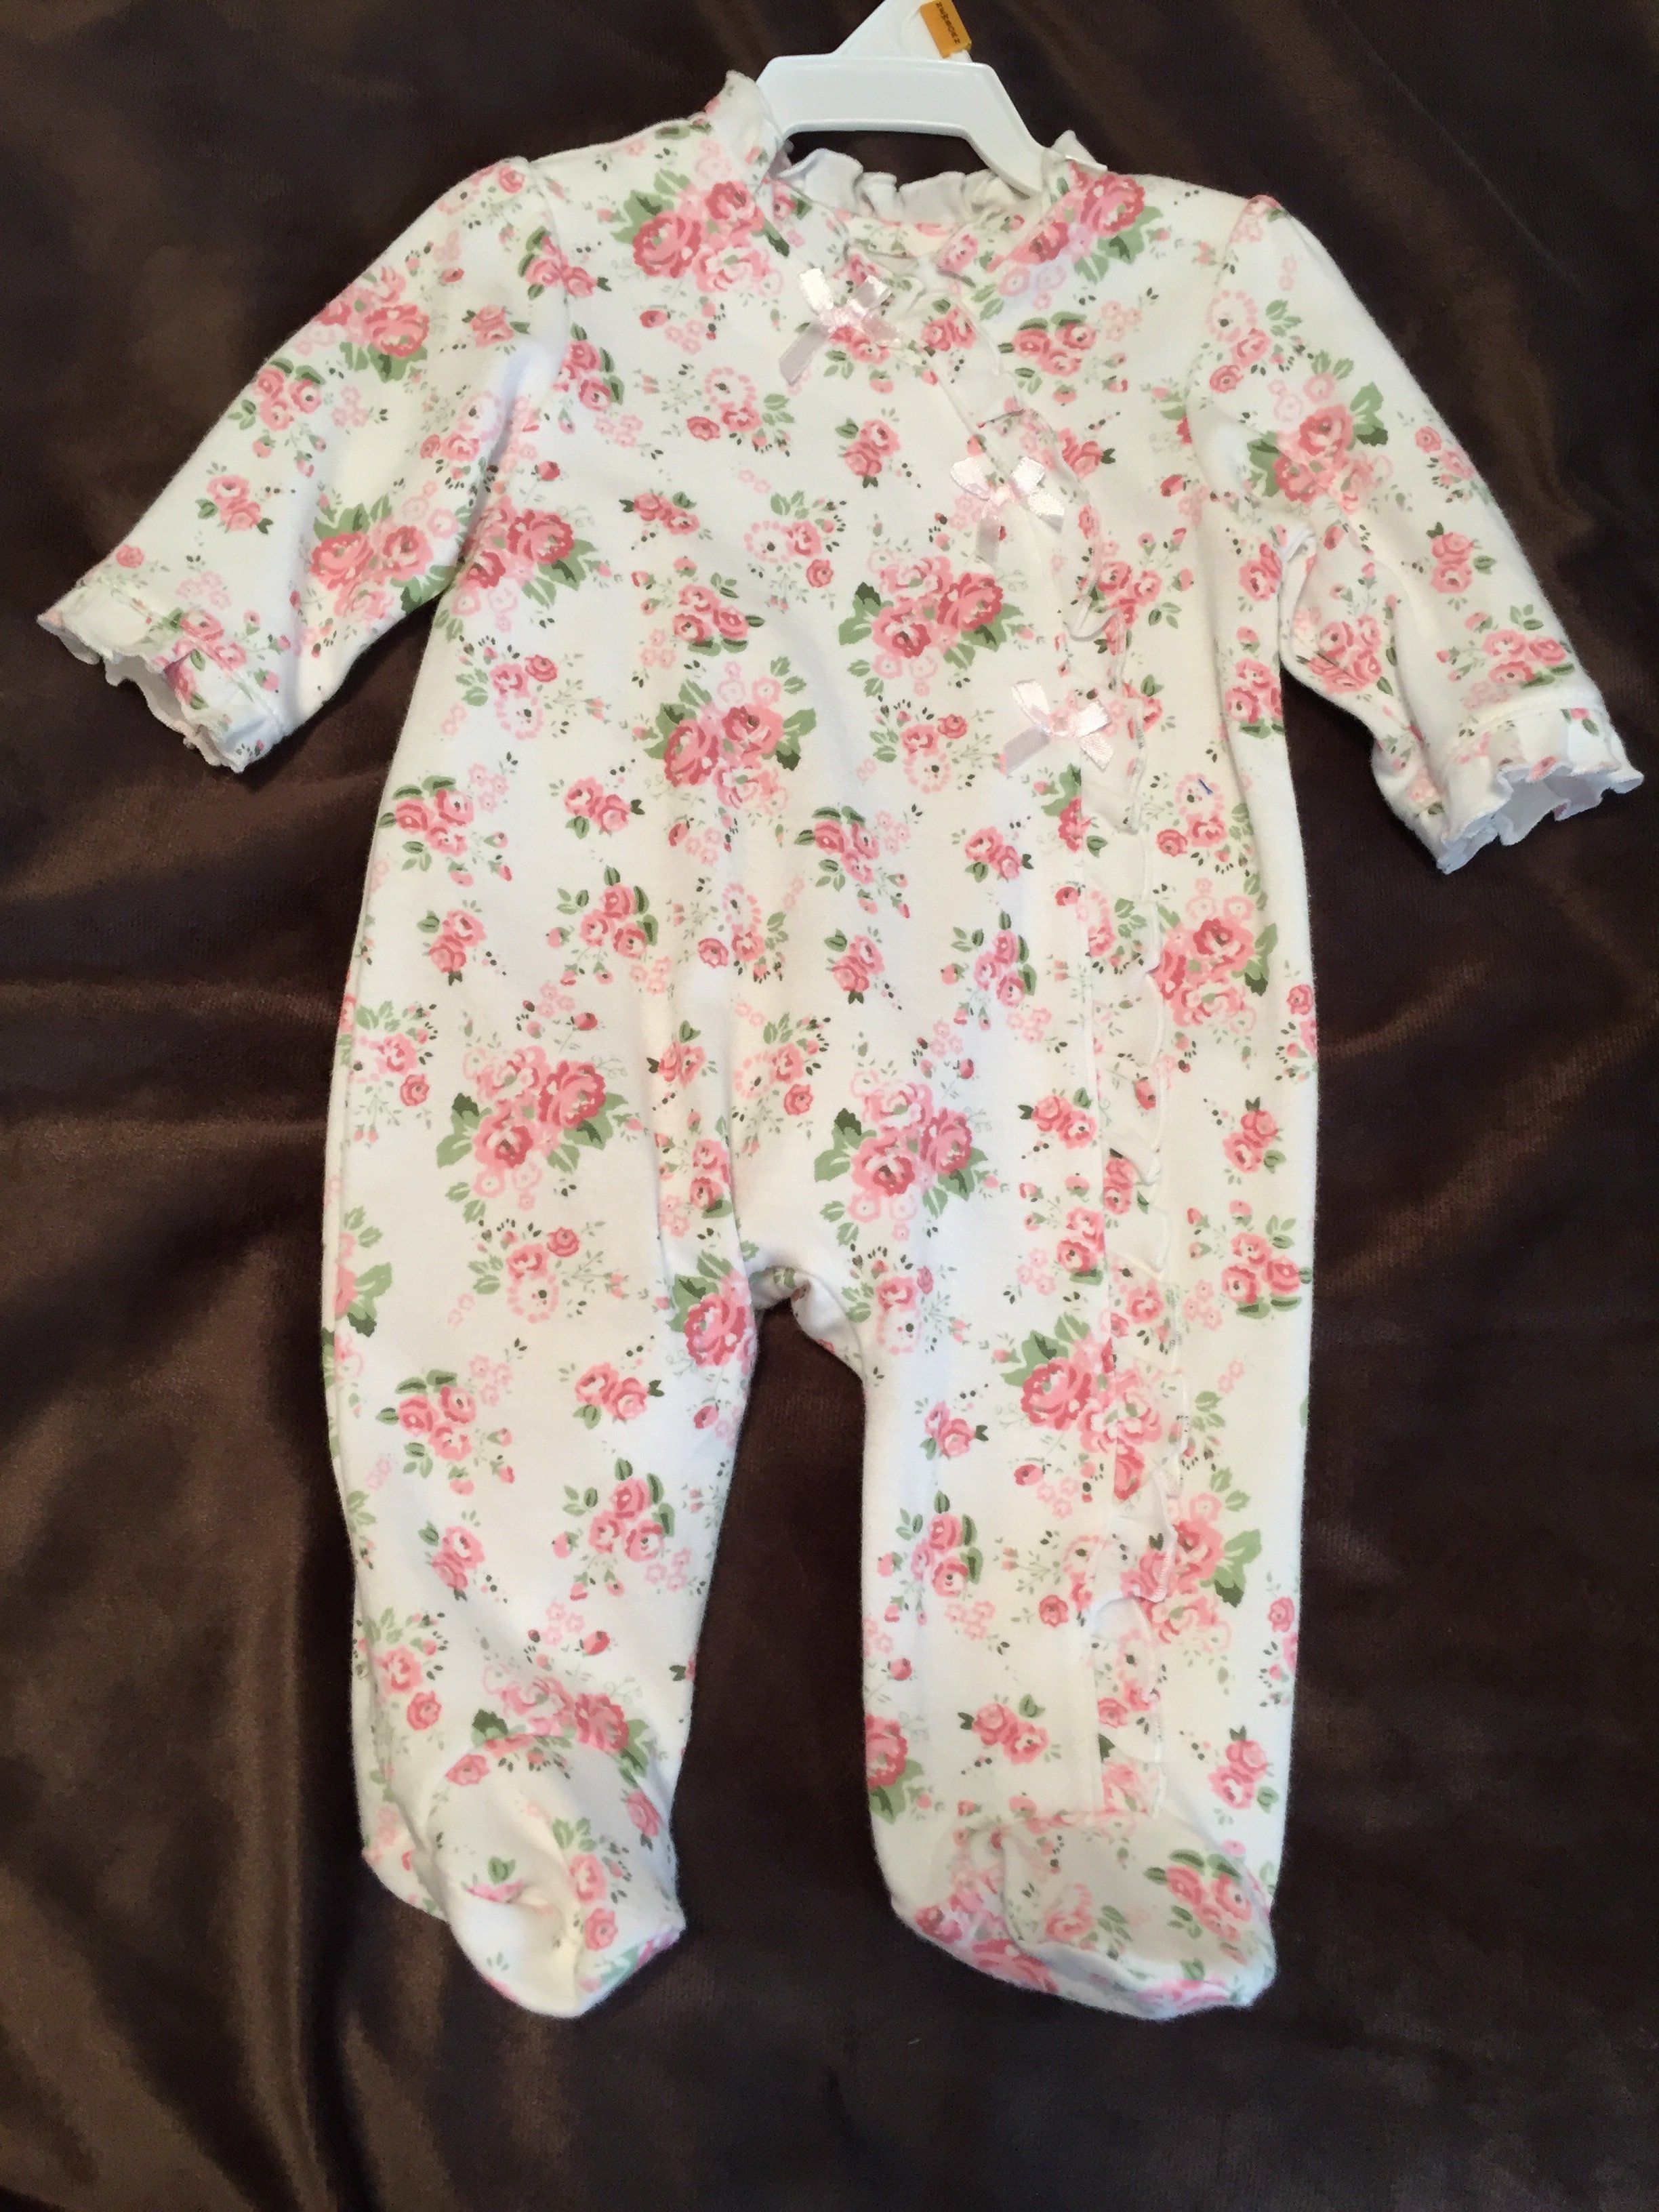 ISO preemie boy clothes - For Sale/Wanted - Bountiful Baby ...